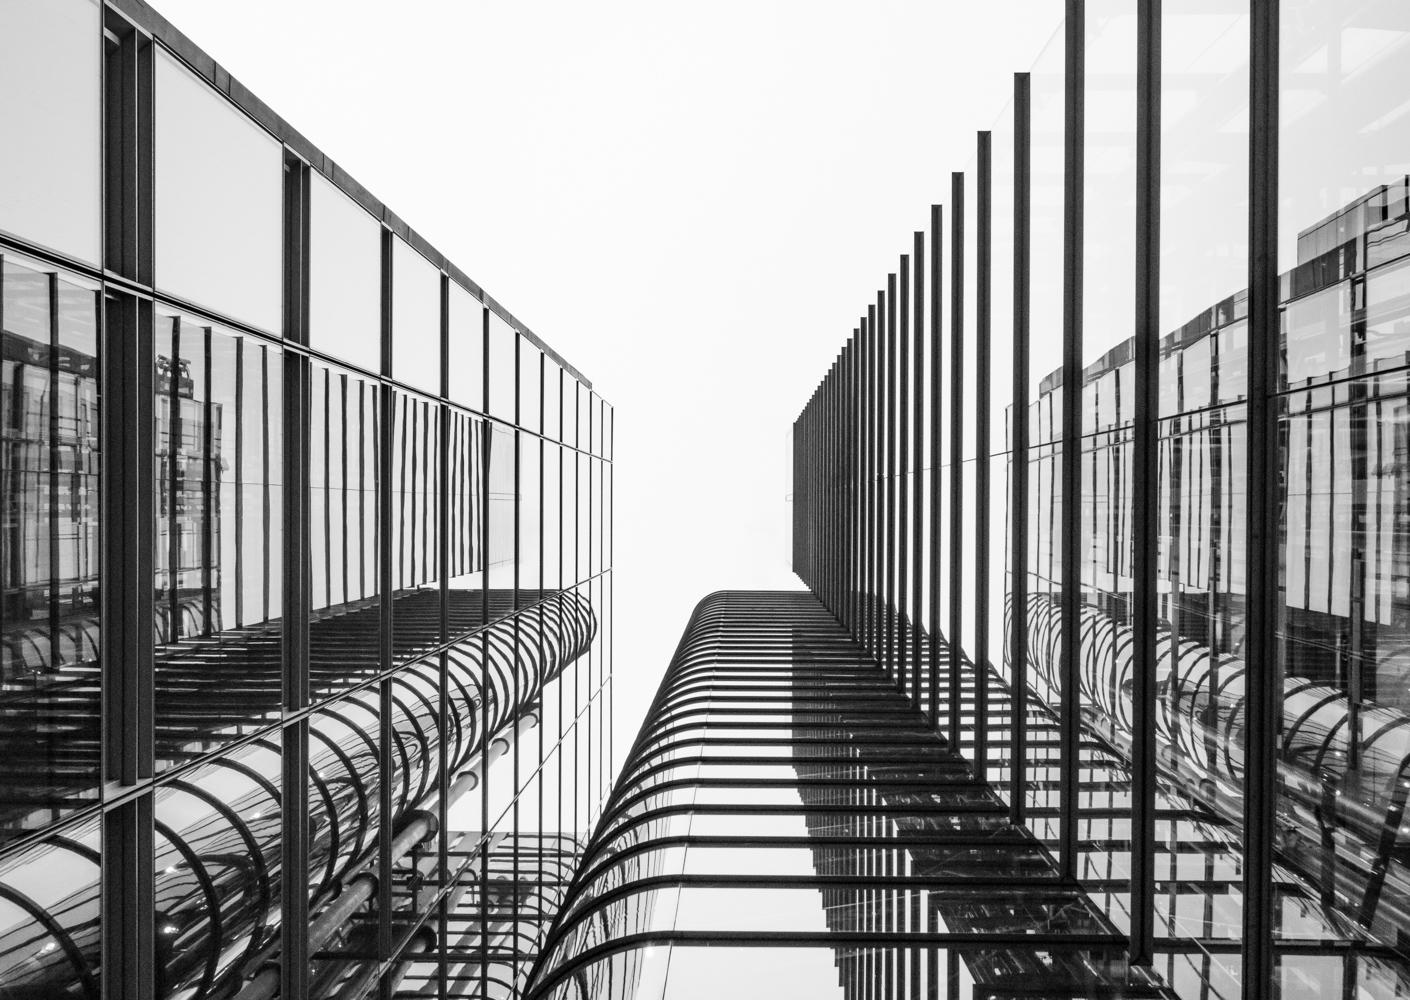 An architectural wall art print in black and white called Mirror Image.